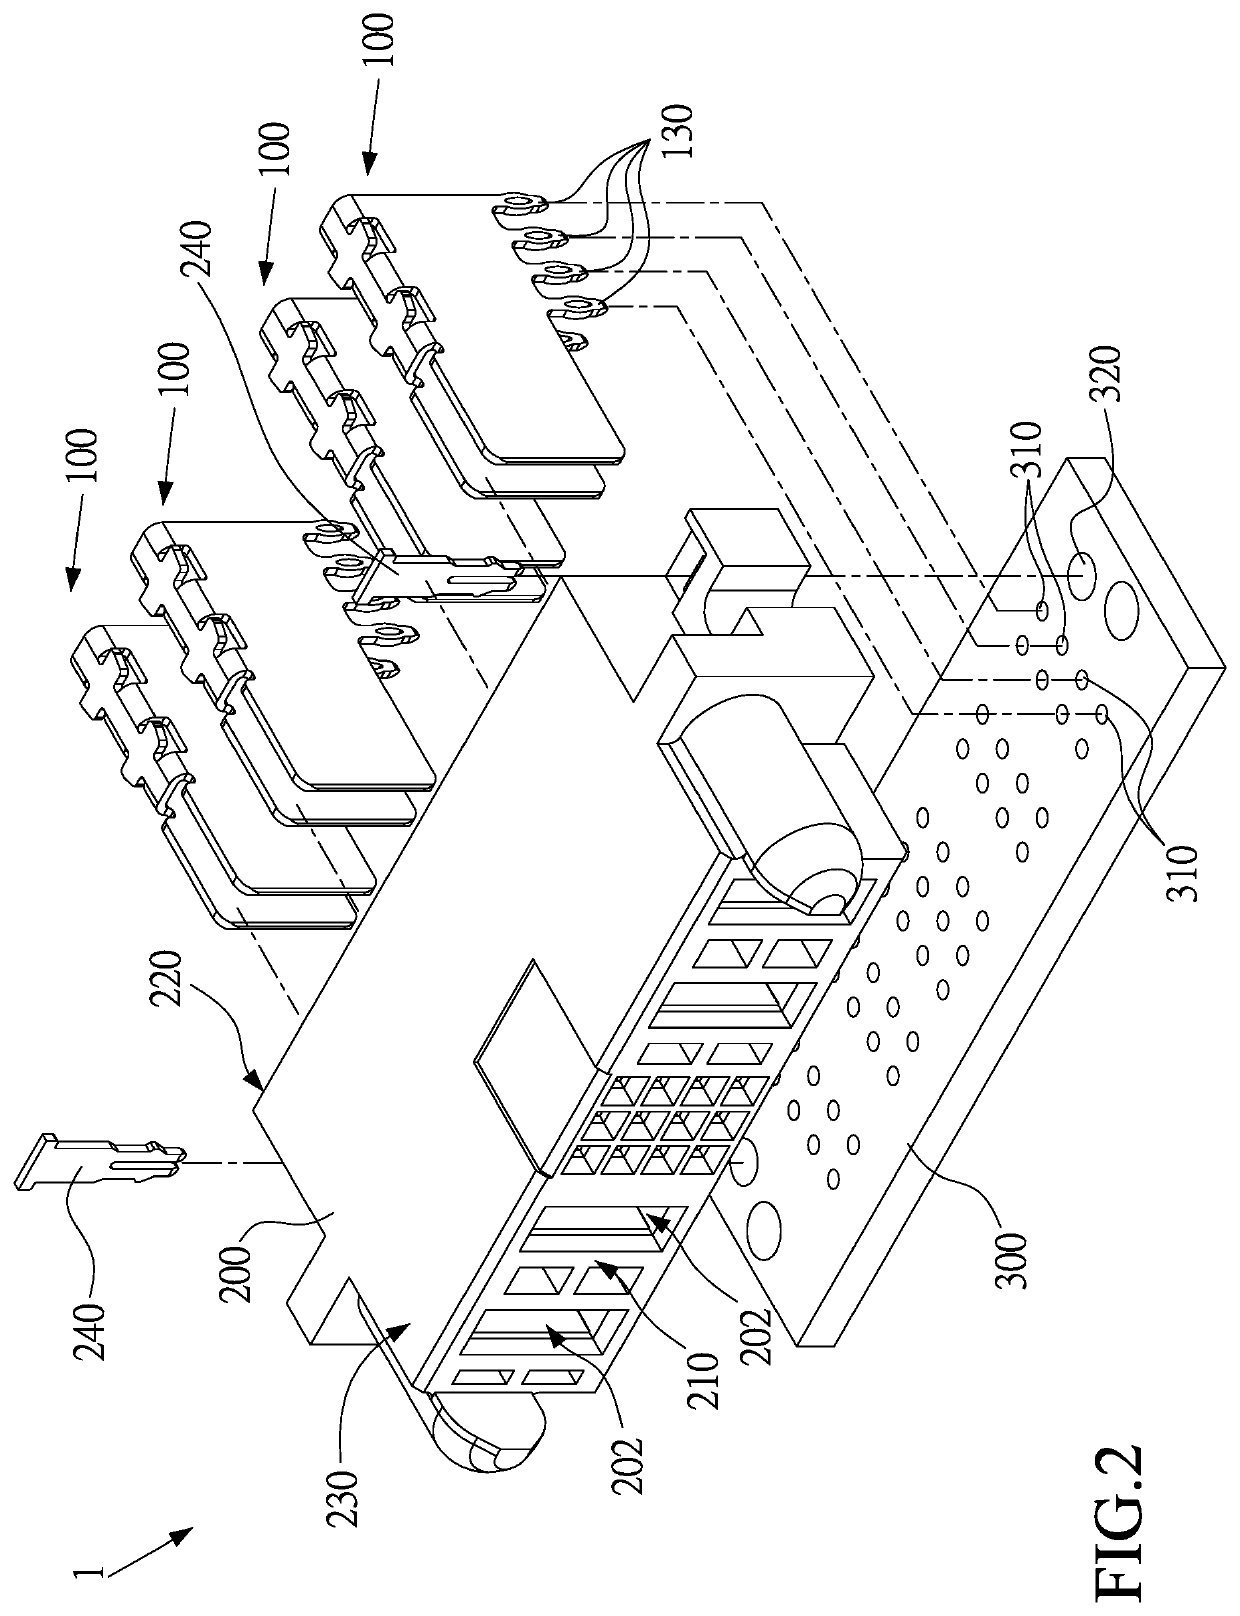 Electrical terminal and electrical connector thereof